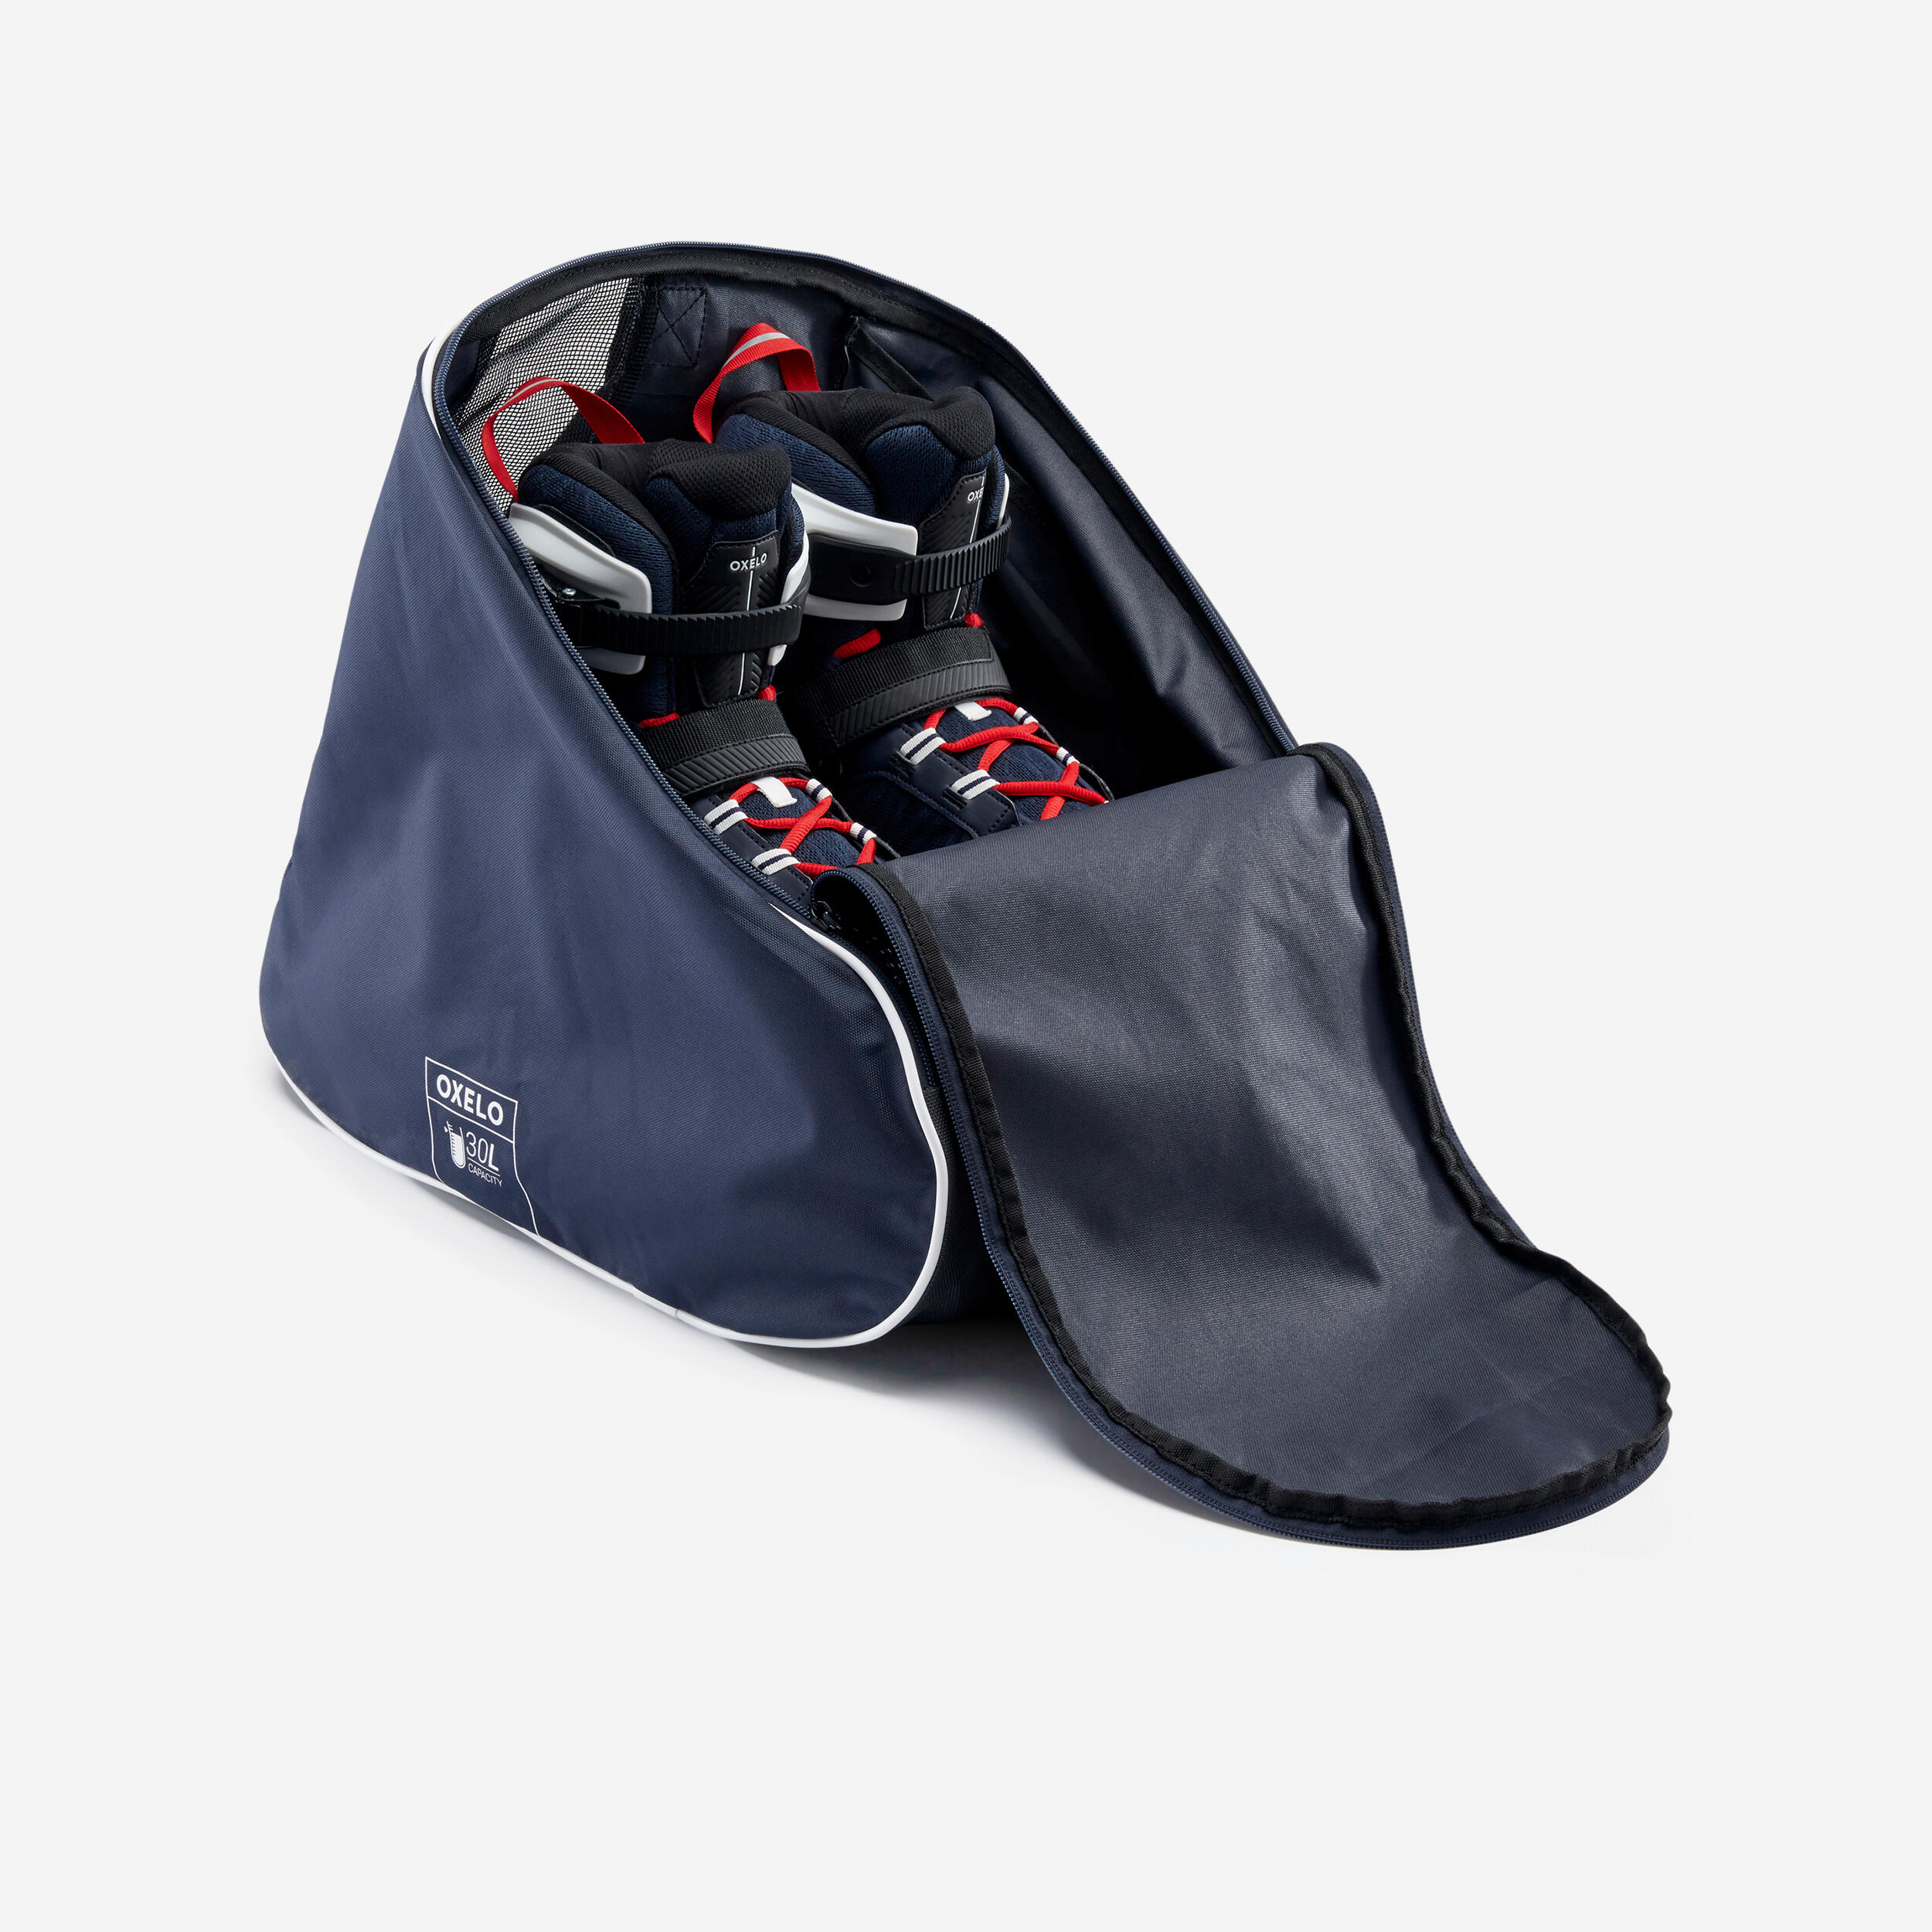 OXELO Adult Inline Skating Bag Fit XL - Blue